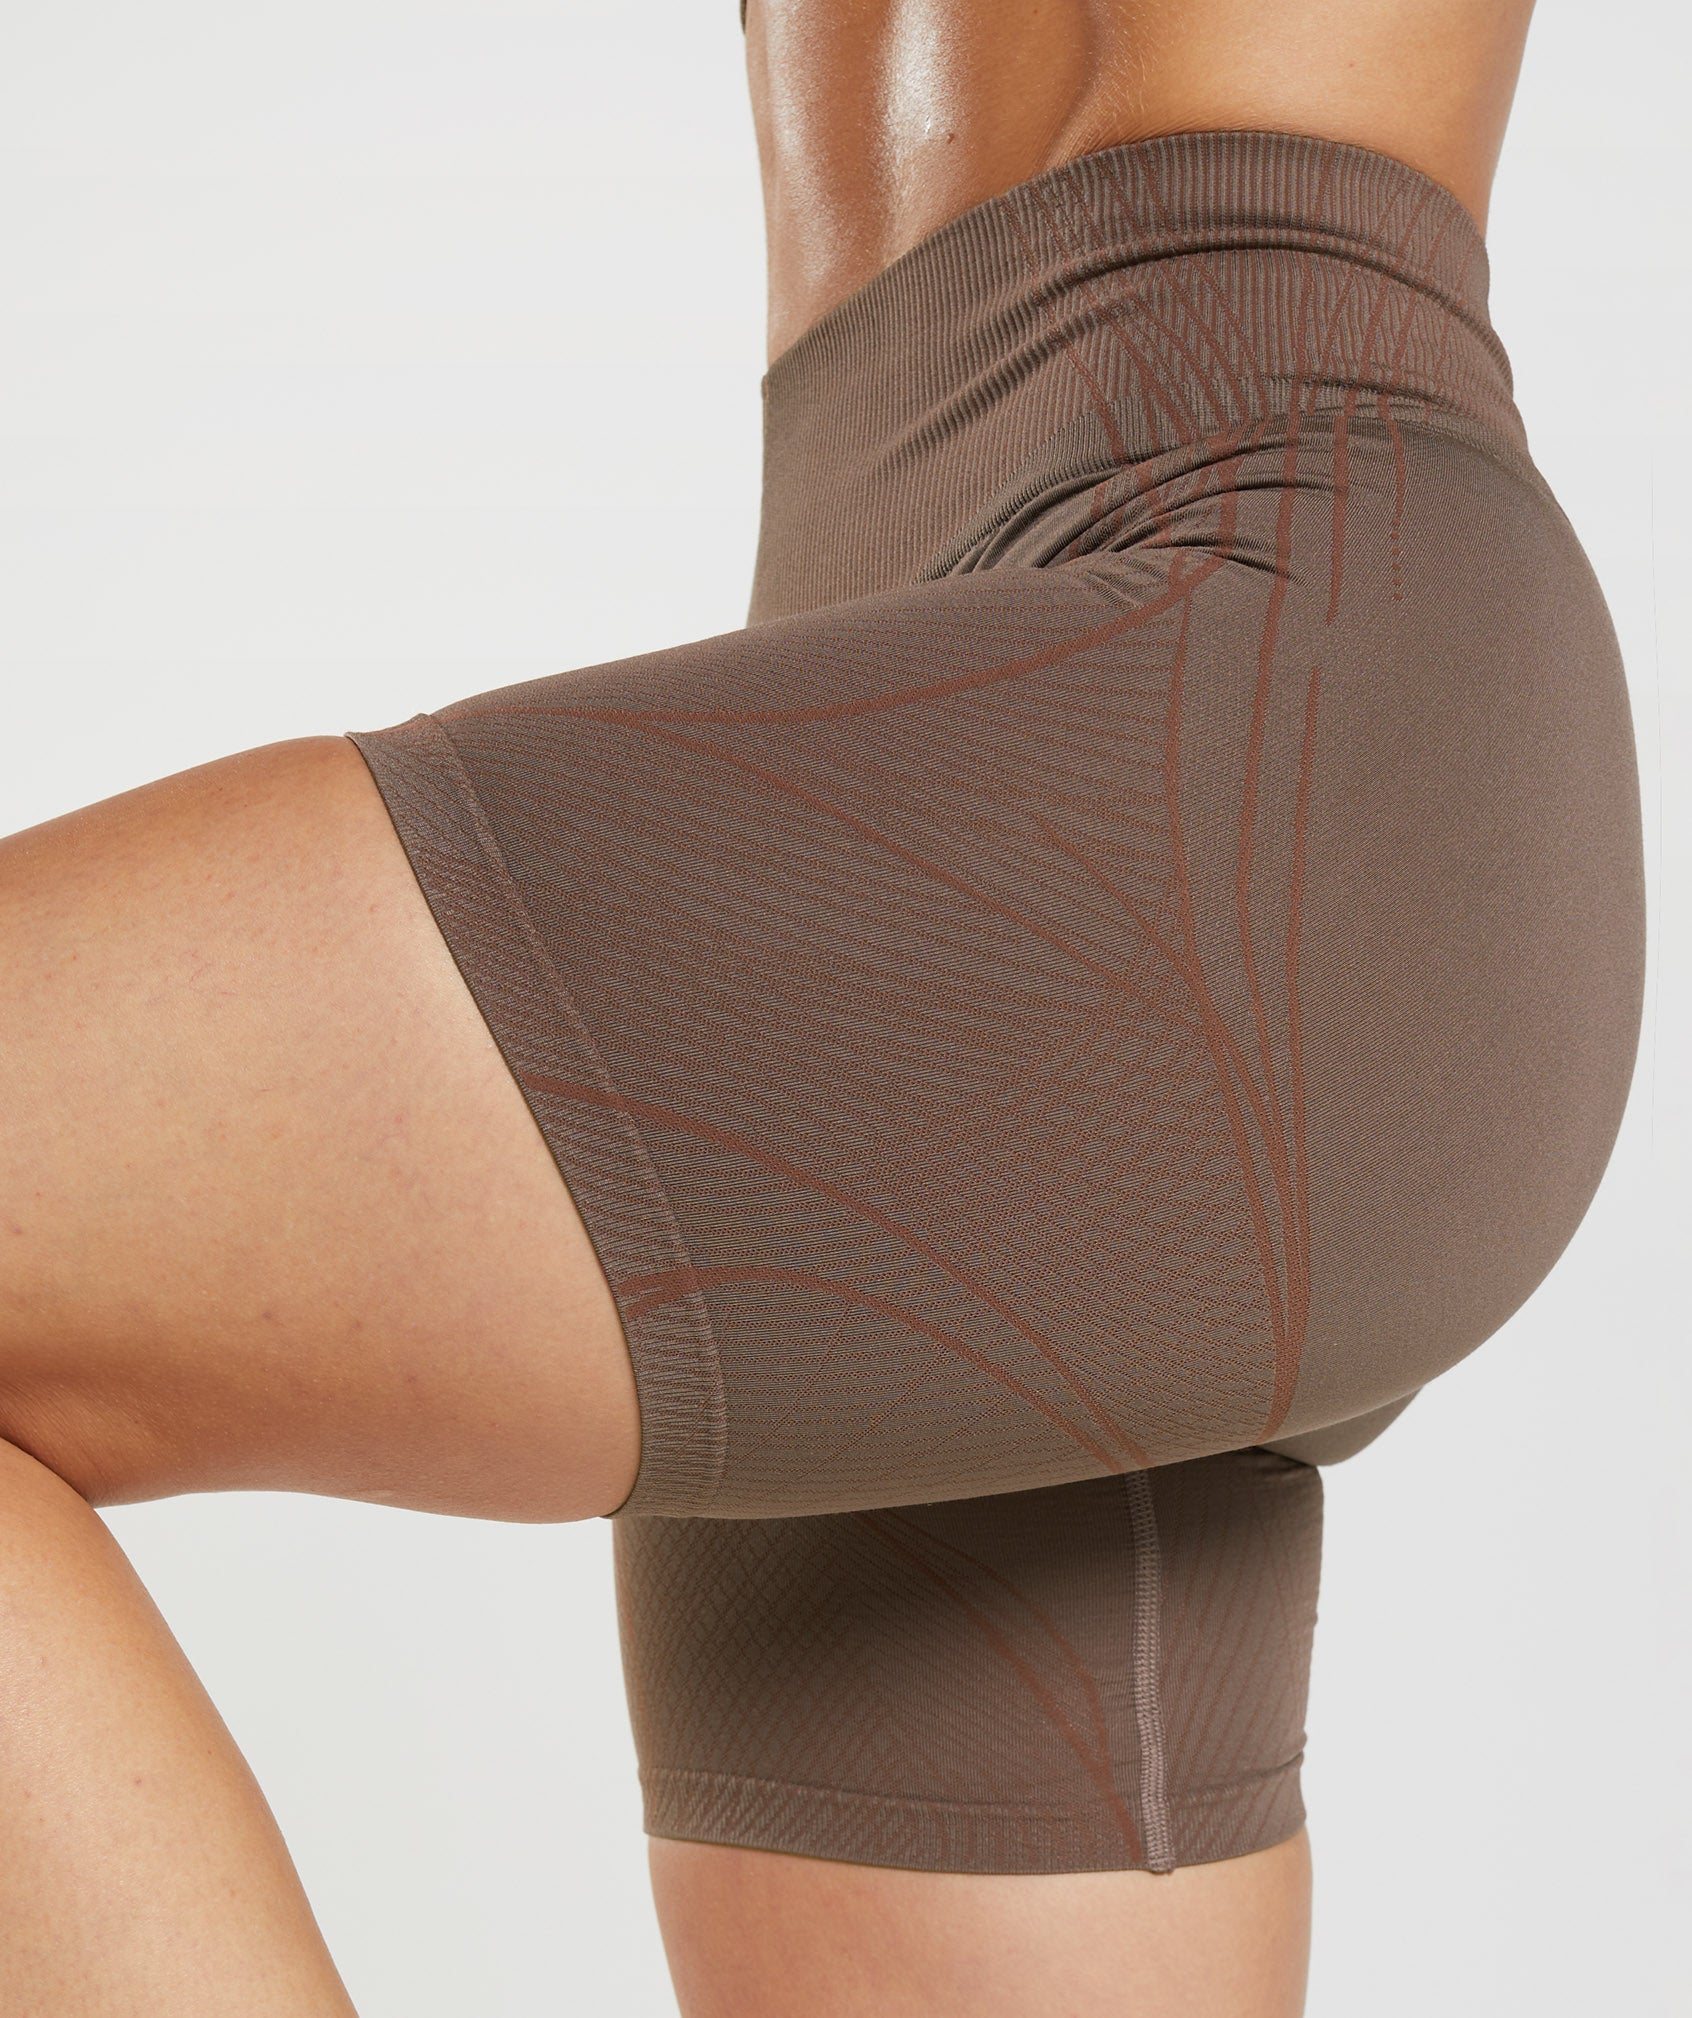 Gymshark Apex Seamless Leggings Brown Size M - $45 (29% Off Retail) - From  Stephanie